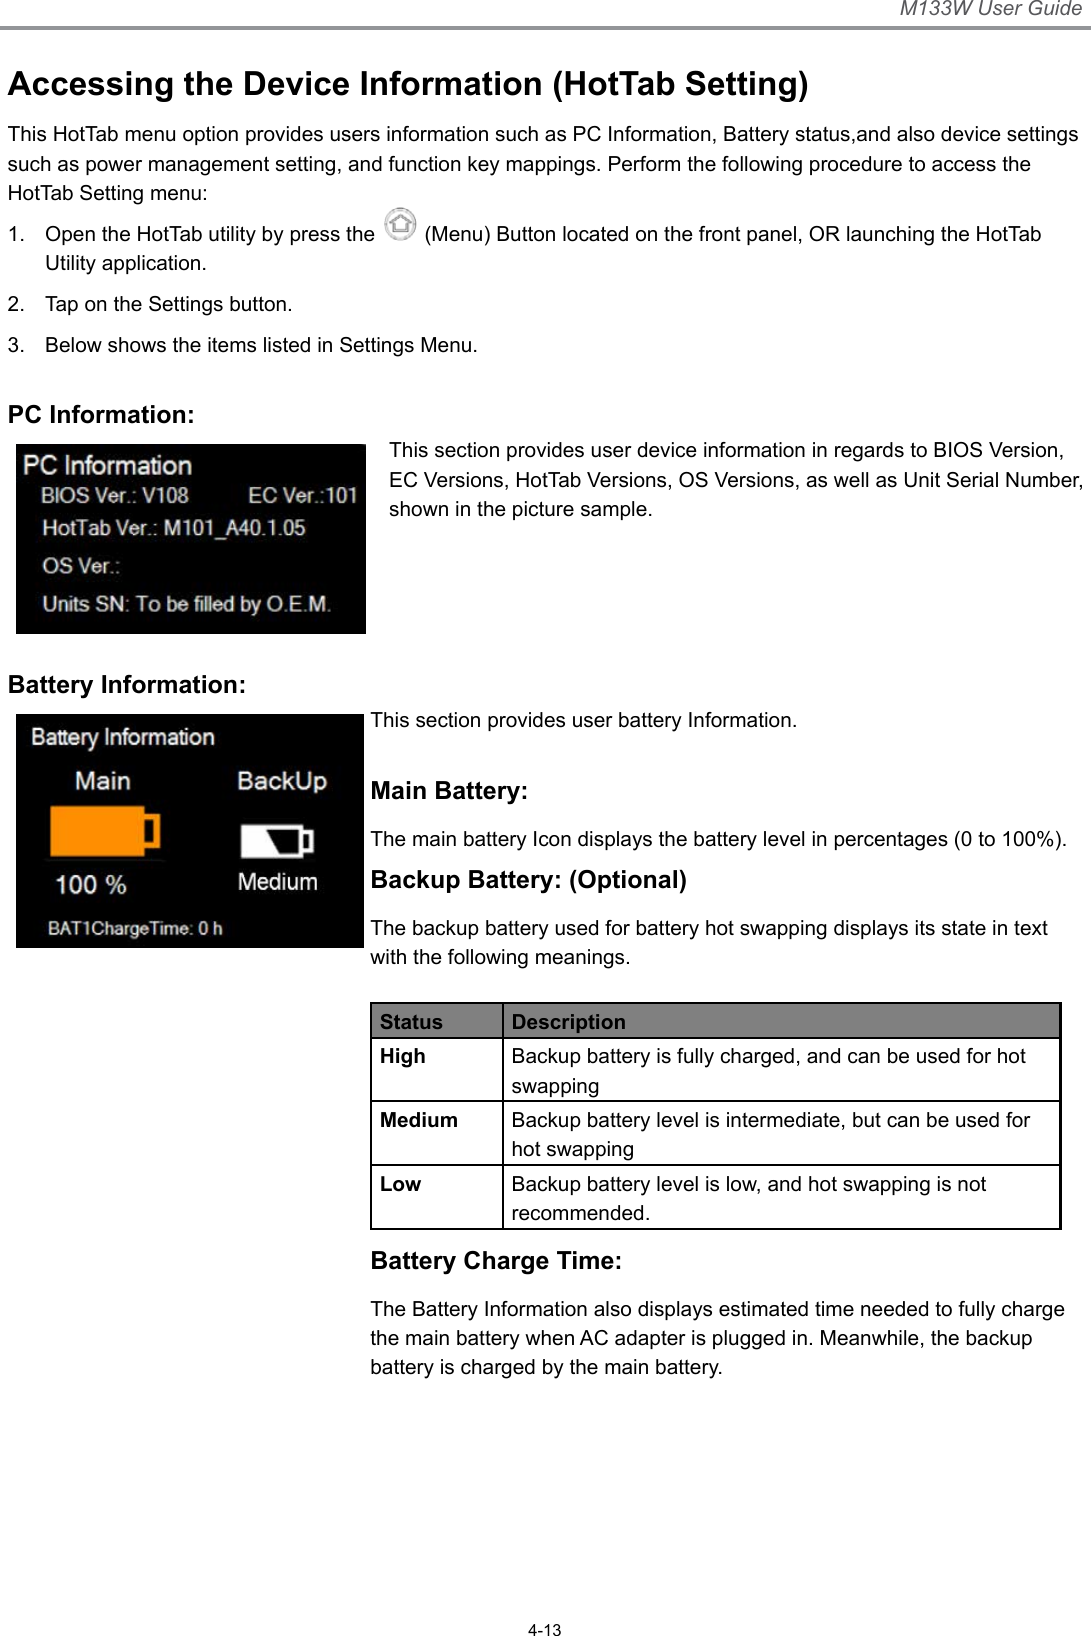 M133W User Guide4-13Accessing the Device Information (HotTab Setting)This HotTab menu option provides users information such as PC Information, Battery status,and also device settings such as power management setting, and function key mappings. Perform the following procedure to access the HotTab Setting menu:1.  Open the HotTab utility by press the   (Menu) Button located on the front panel, OR launching the HotTab Utility application.2.  Tap on the Settings button.3.  Below shows the items listed in Settings Menu. PC Information:This section provides user device information in regards to BIOS Version, EC Versions, HotTab Versions, OS Versions, as well as Unit Serial Number, shown in the picture sample. Battery Information:This section provides user battery Information. Main Battery:The main battery Icon displays the battery level in percentages (0 to 100%).Backup Battery: (Optional)The backup battery used for battery hot swapping displays its state in text with the following meanings.Status DescriptionHigh Backup battery is fully charged, and can be used for hot swappingMedium Backup battery level is intermediate, but can be used for hot swappingLow Backup battery level is low, and hot swapping is not recommended.Battery Charge Time:The Battery Information also displays estimated time needed to fully charge the main battery when AC adapter is plugged in. Meanwhile, the backup battery is charged by the main battery.